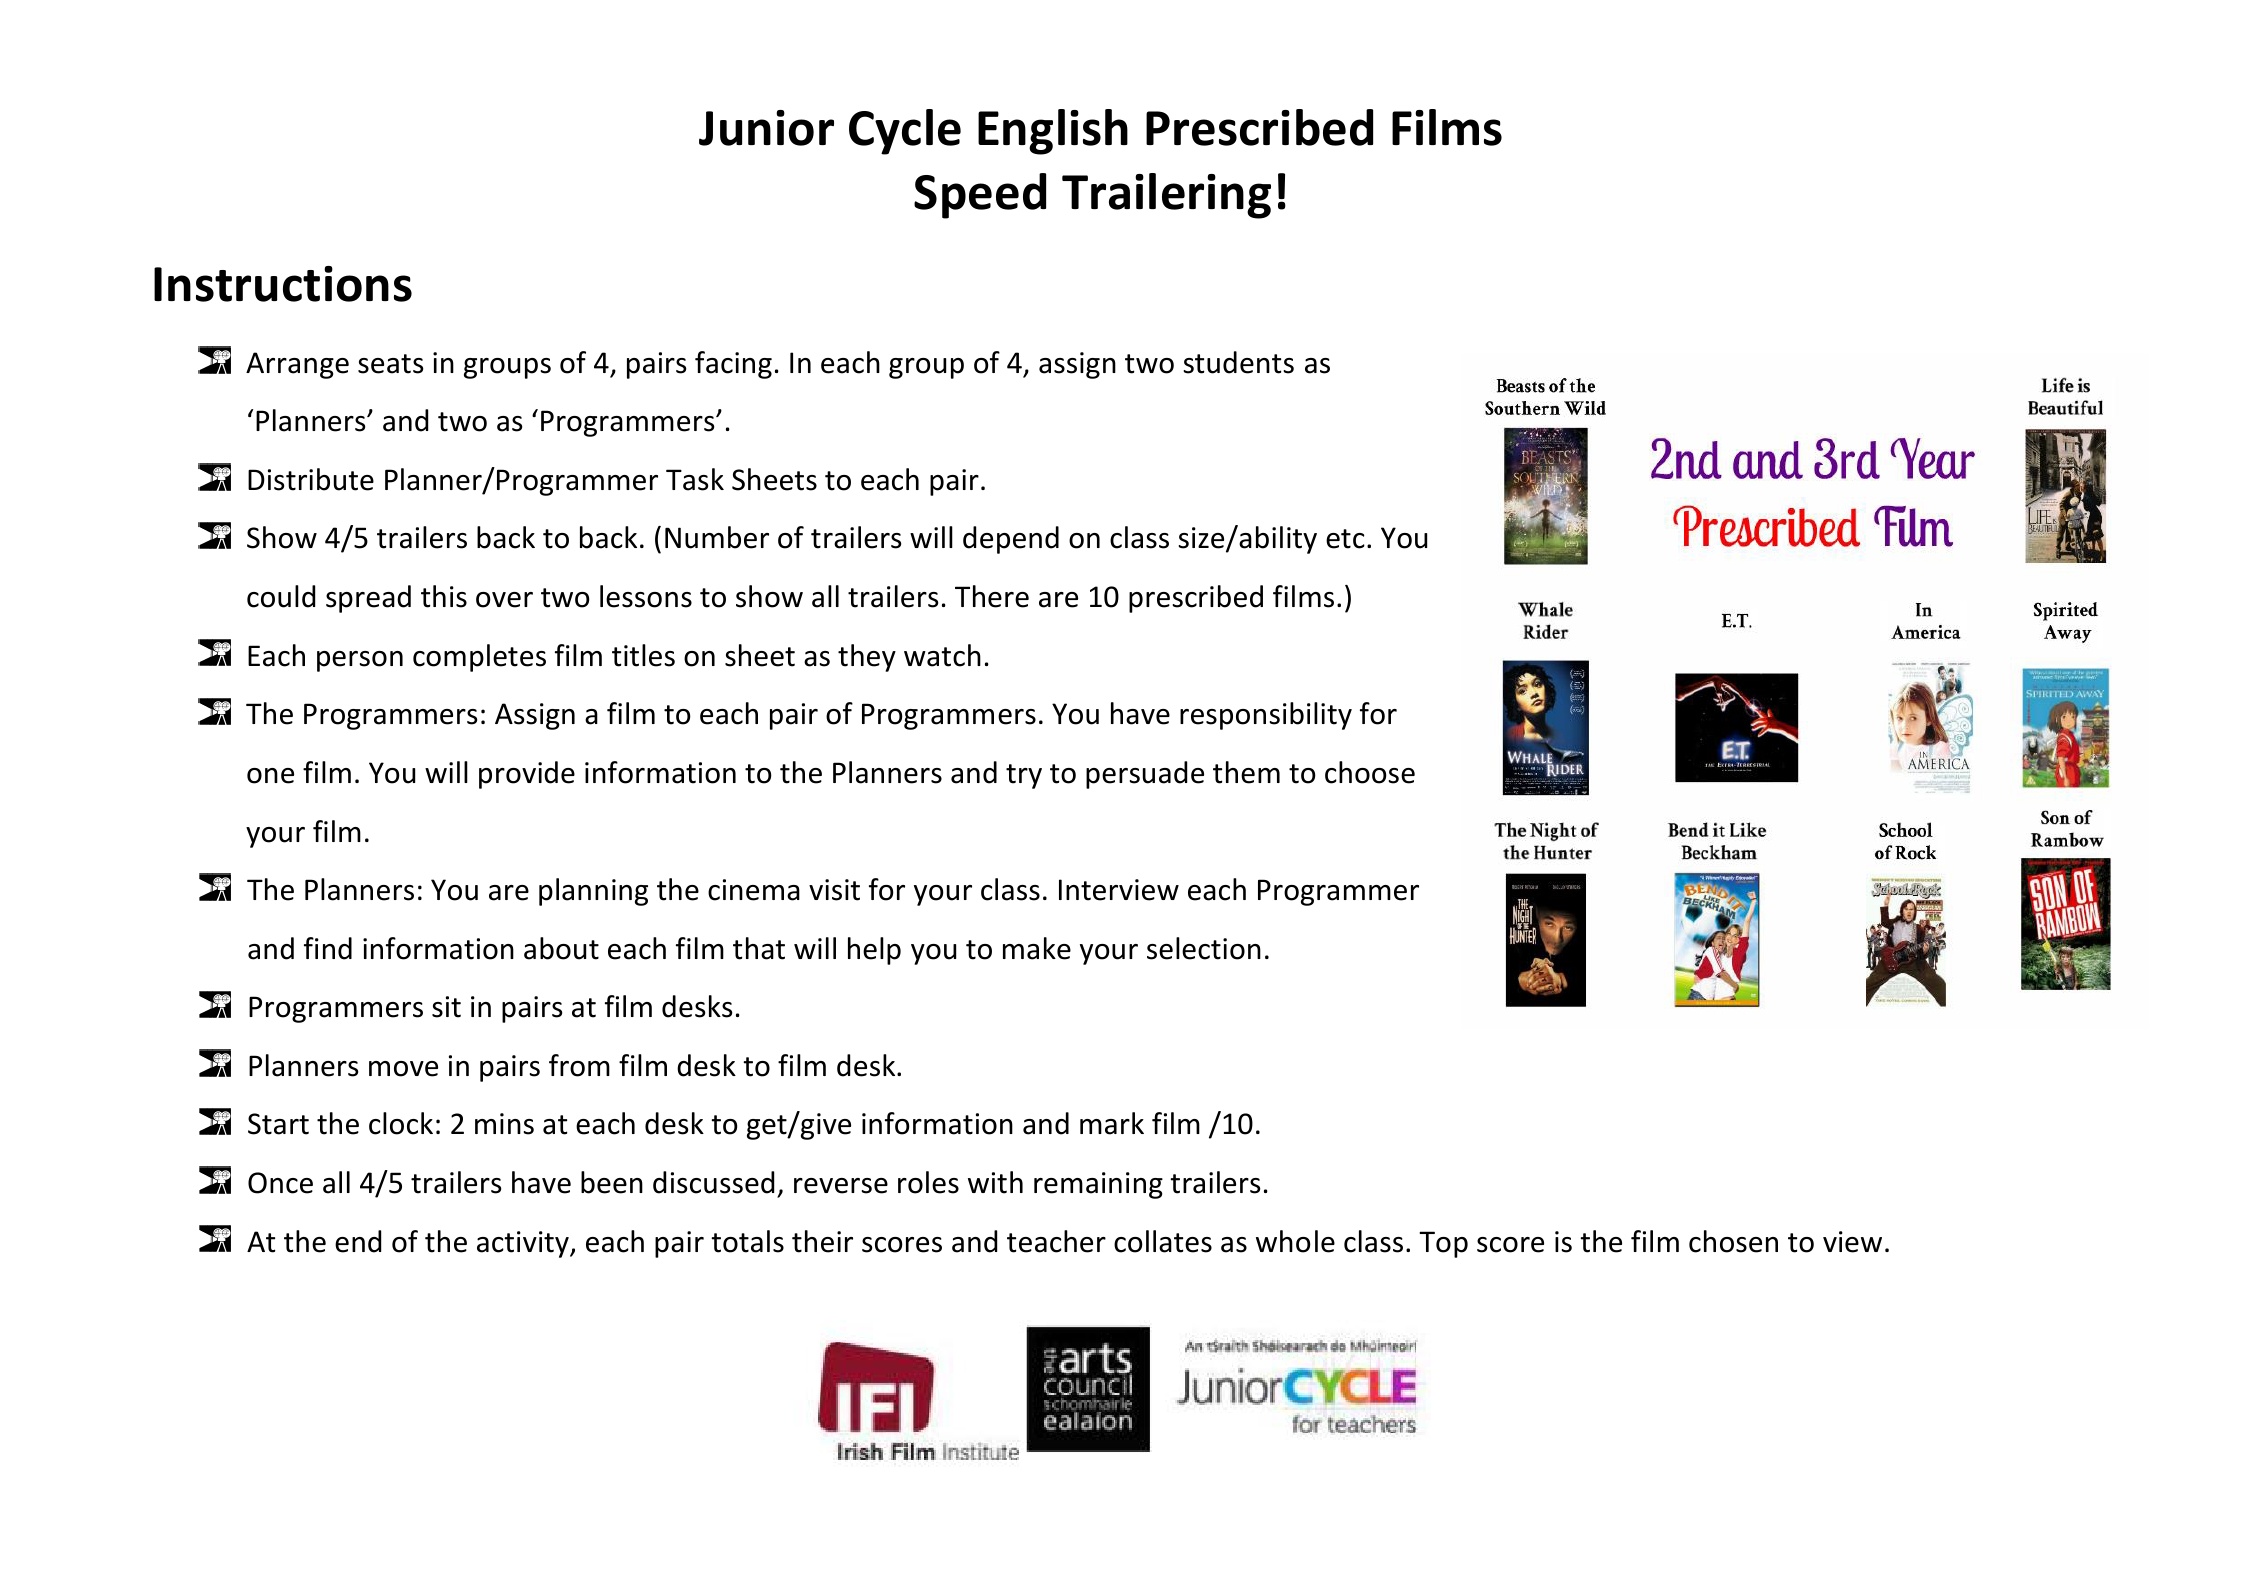 english-resources-film-junior-cycle-for-teachers-jct